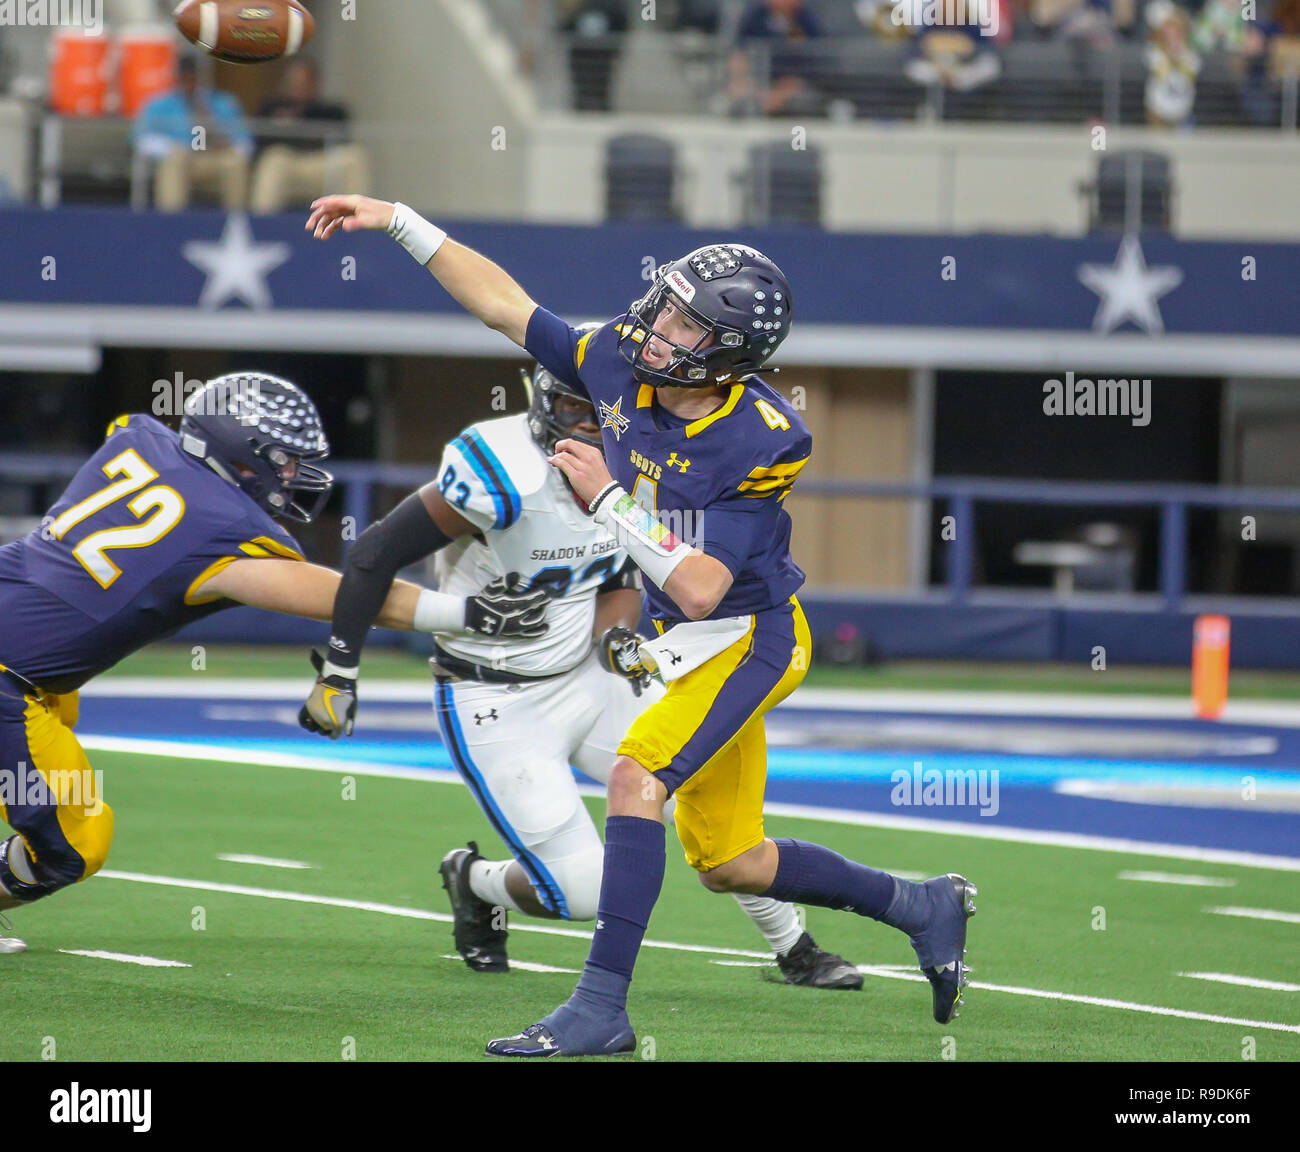 Arlington, Texas, USA. 12th Dec, 2018. Highland Park QB Chandler Morris #4 throws the ball downfield during the UIL Texas state championships football game between the Highland Park Scots and the Shadow Creek Sharks at AT&T Stadium in Arlington, Texas. Kyle Okita/CSM/Alamy Live News Stock Photo